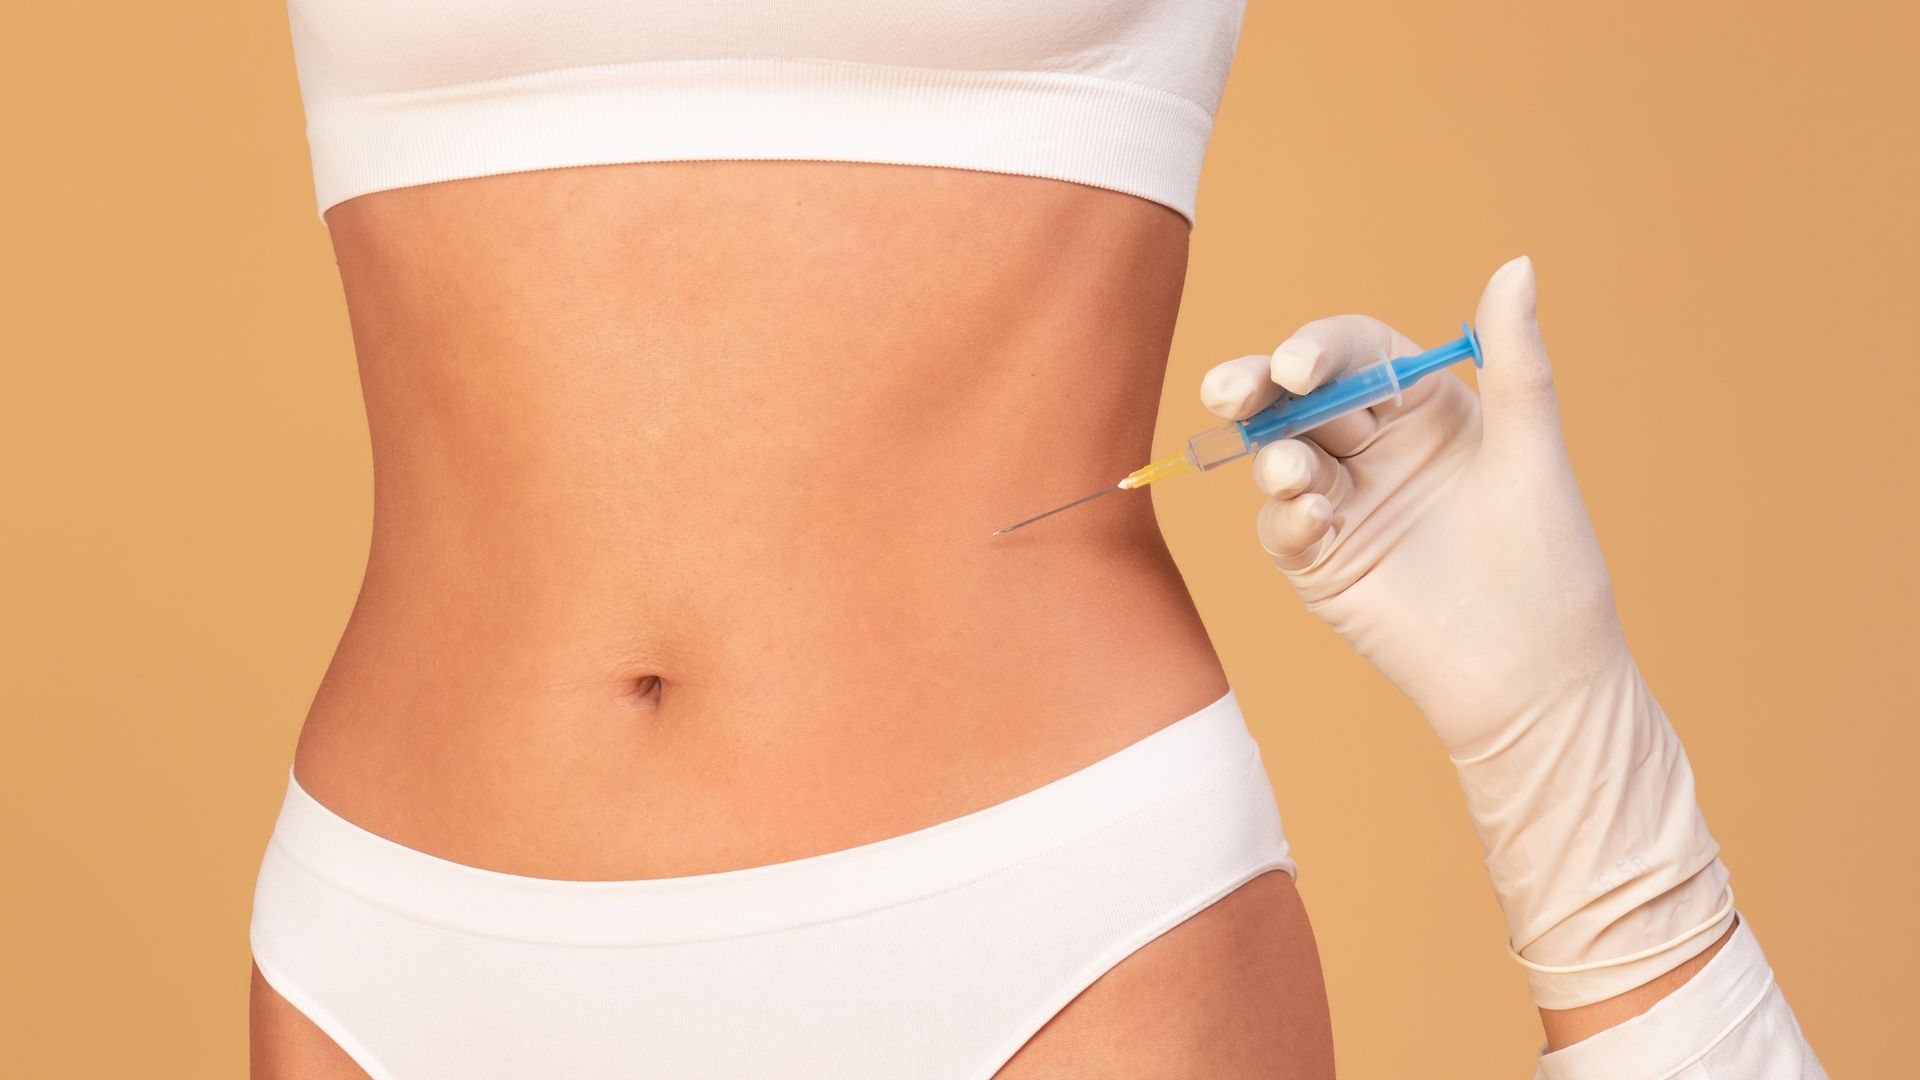 a woman is getting an injection in her stomach